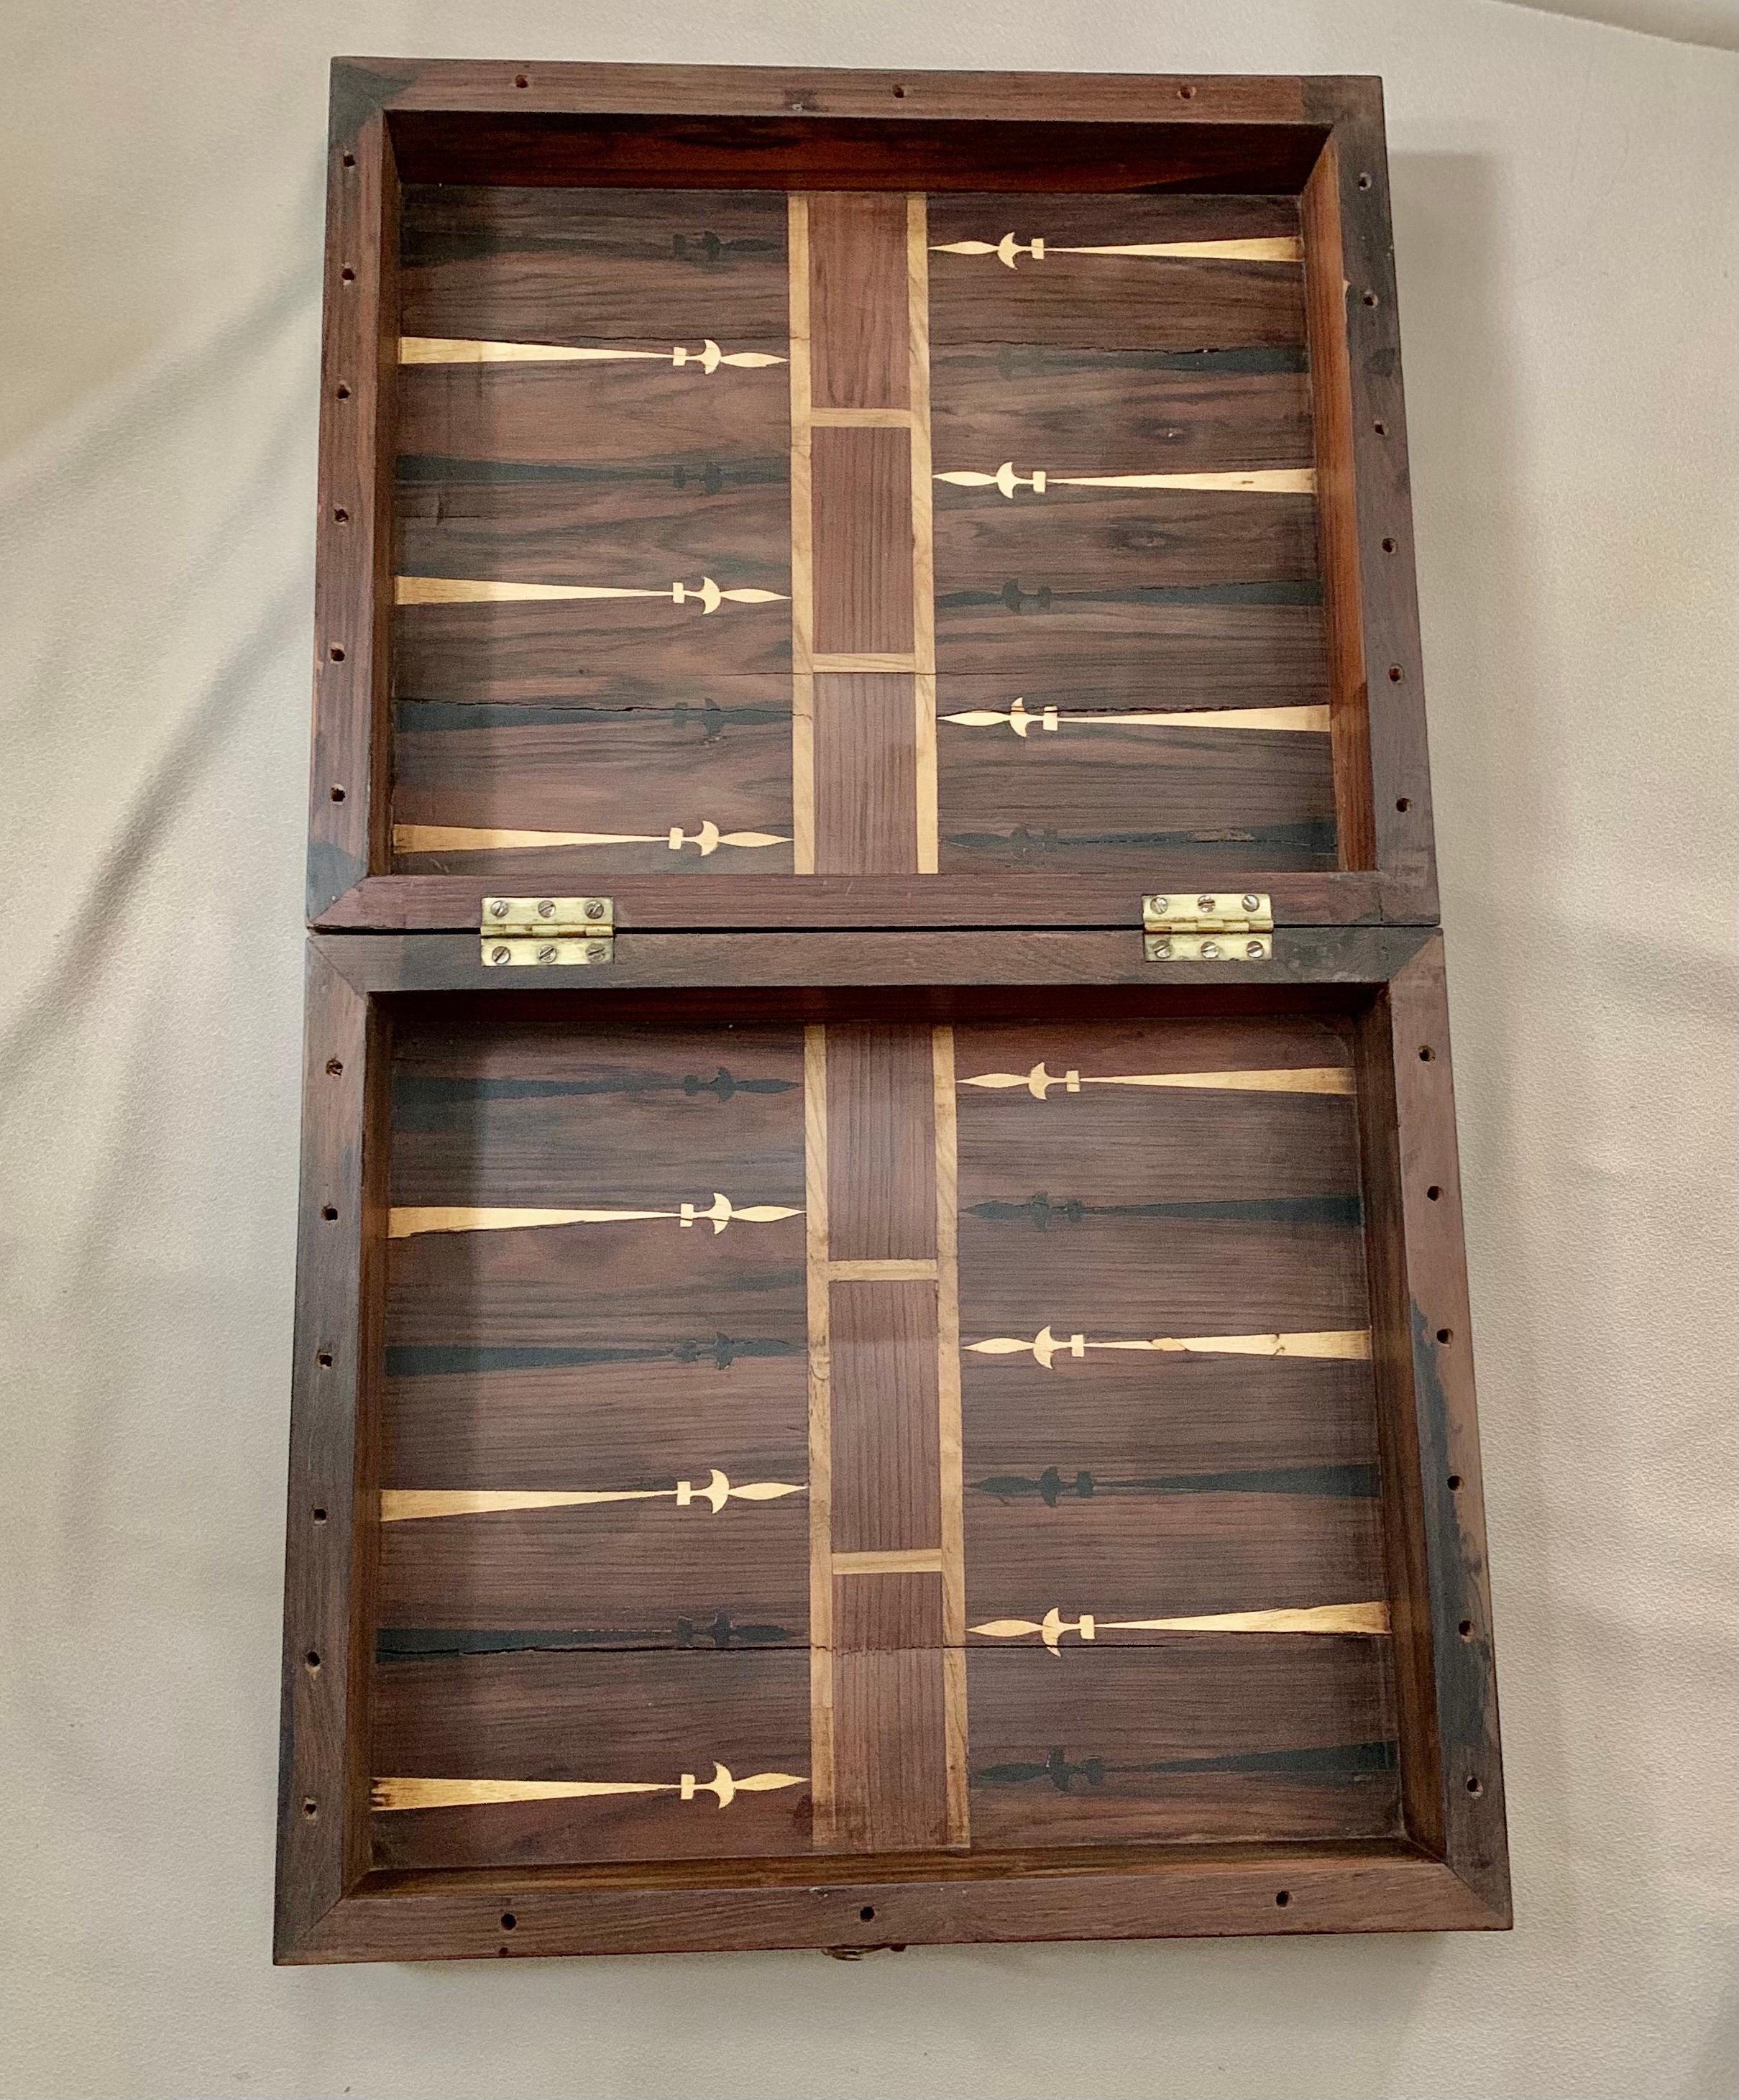 Women's or Men's Large 17th Century Rosewood and Walnut Game Box for Chess, Backgammon, Checkers